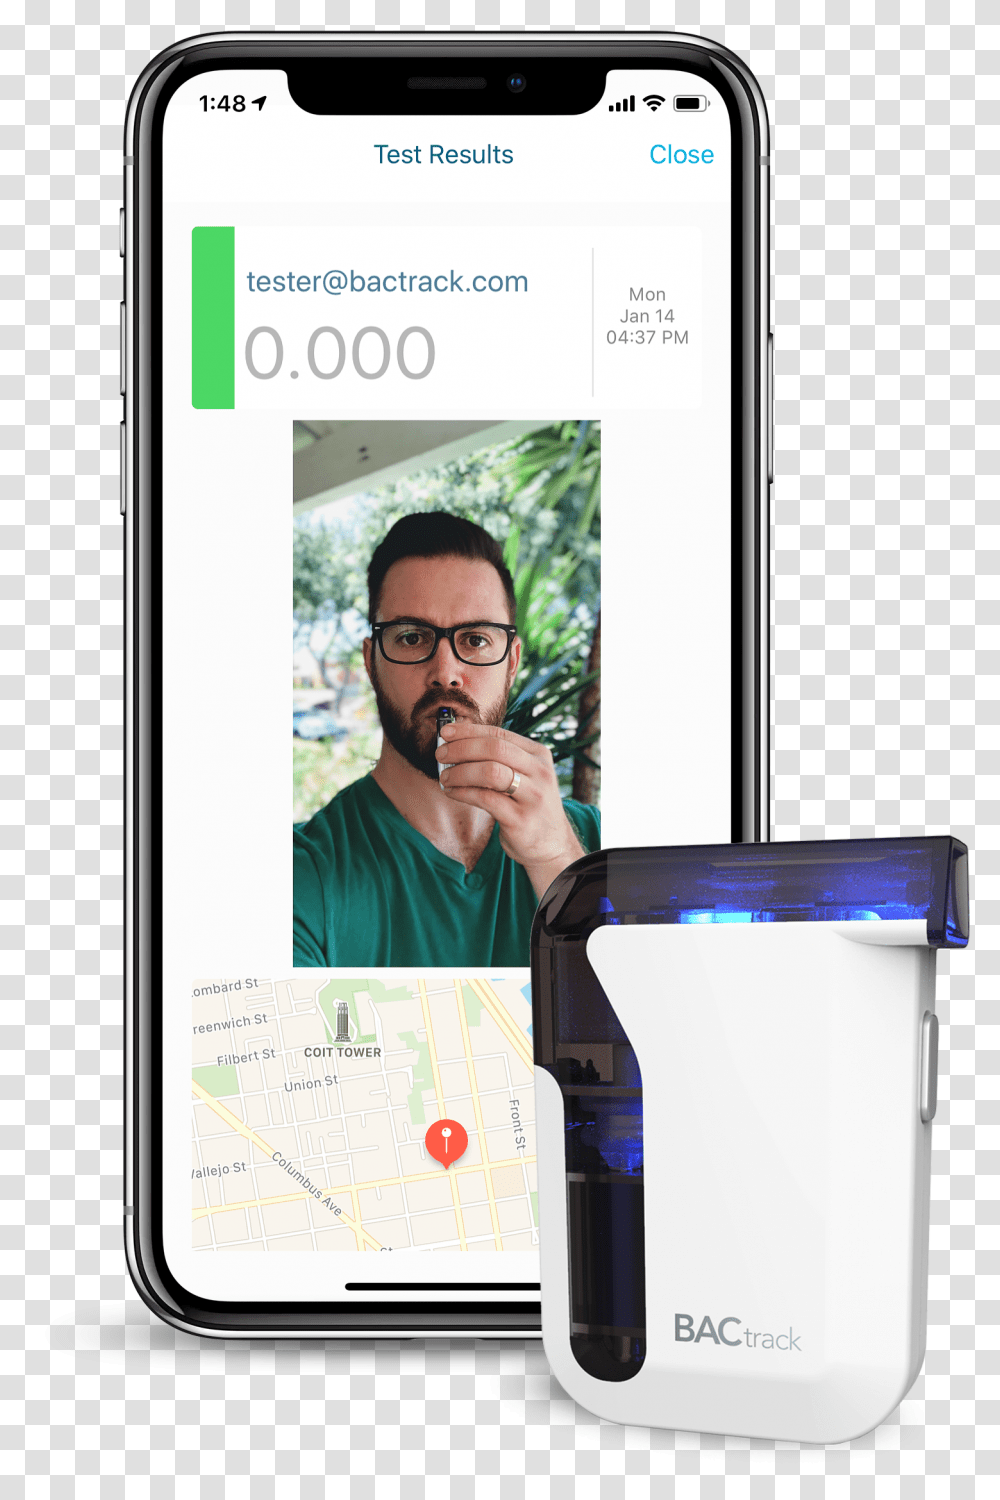 Bactrack View Appbased Remote Alcohol Monitoring For Ios Instagram Dm Request Screen, Person, Human, Glasses, Accessories Transparent Png